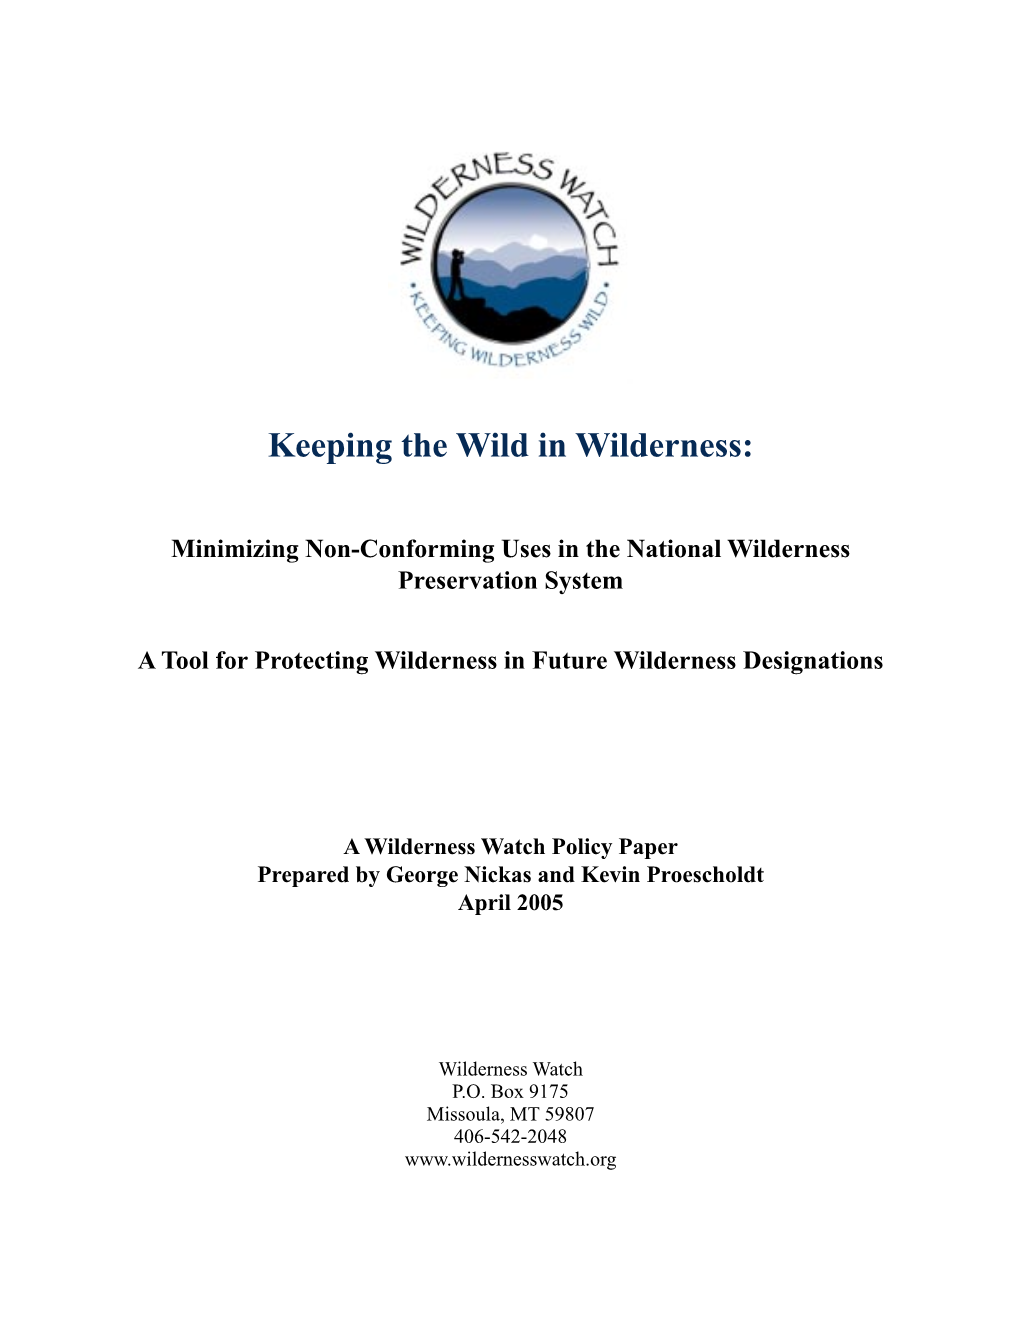 Minimizing Non-Conforming Uses in the National Wilderness Preservation System